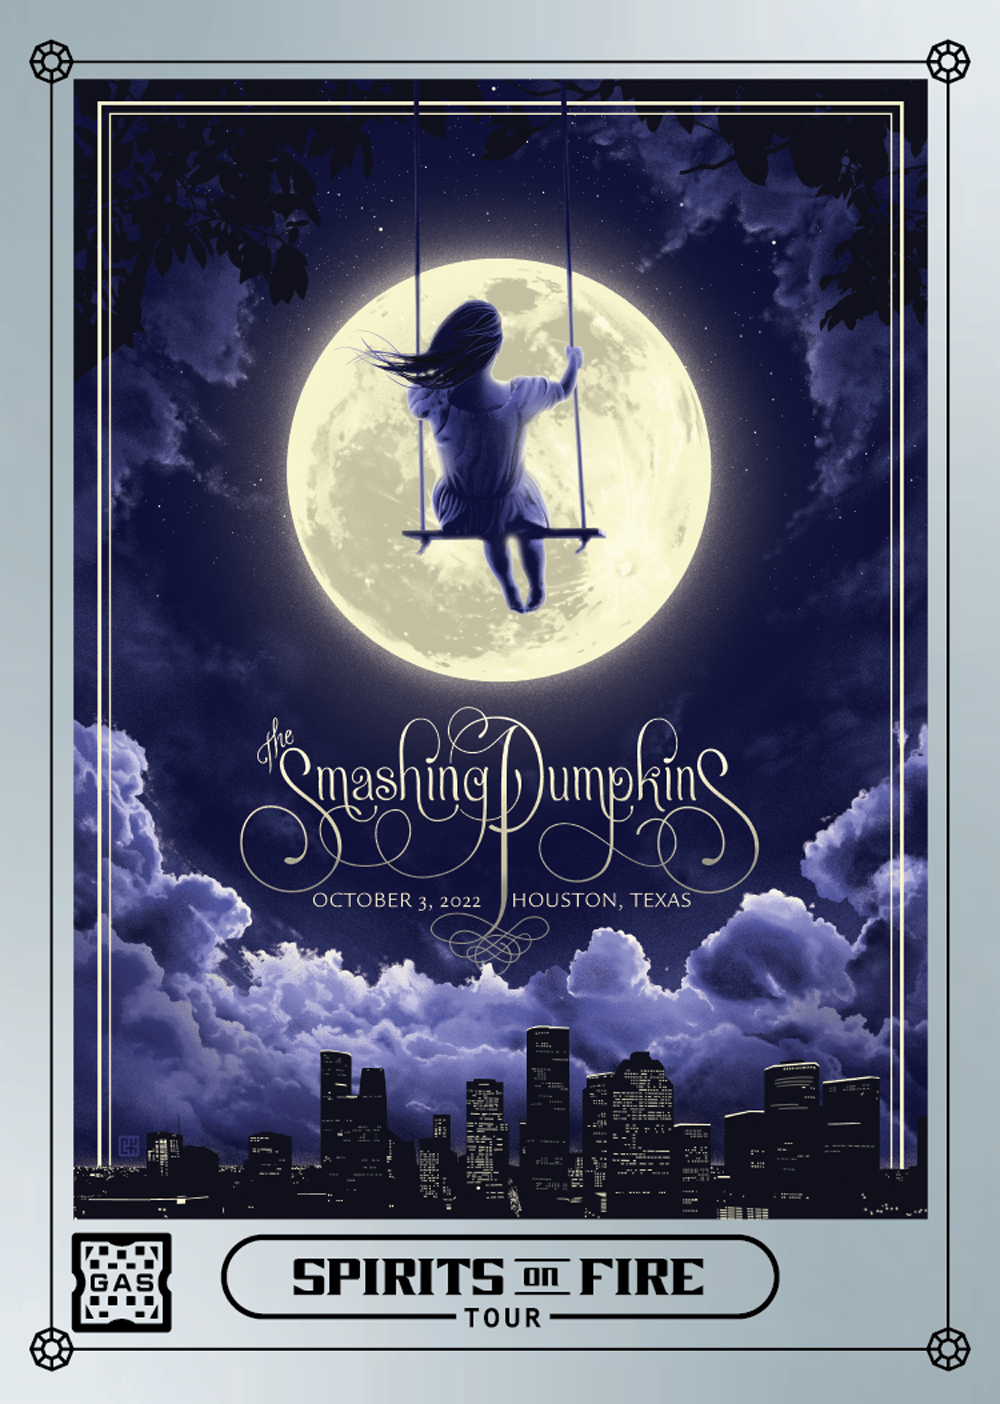 The Smashing Pumpkins Houston October 3, 2022 Exclusive GAS Trading Card